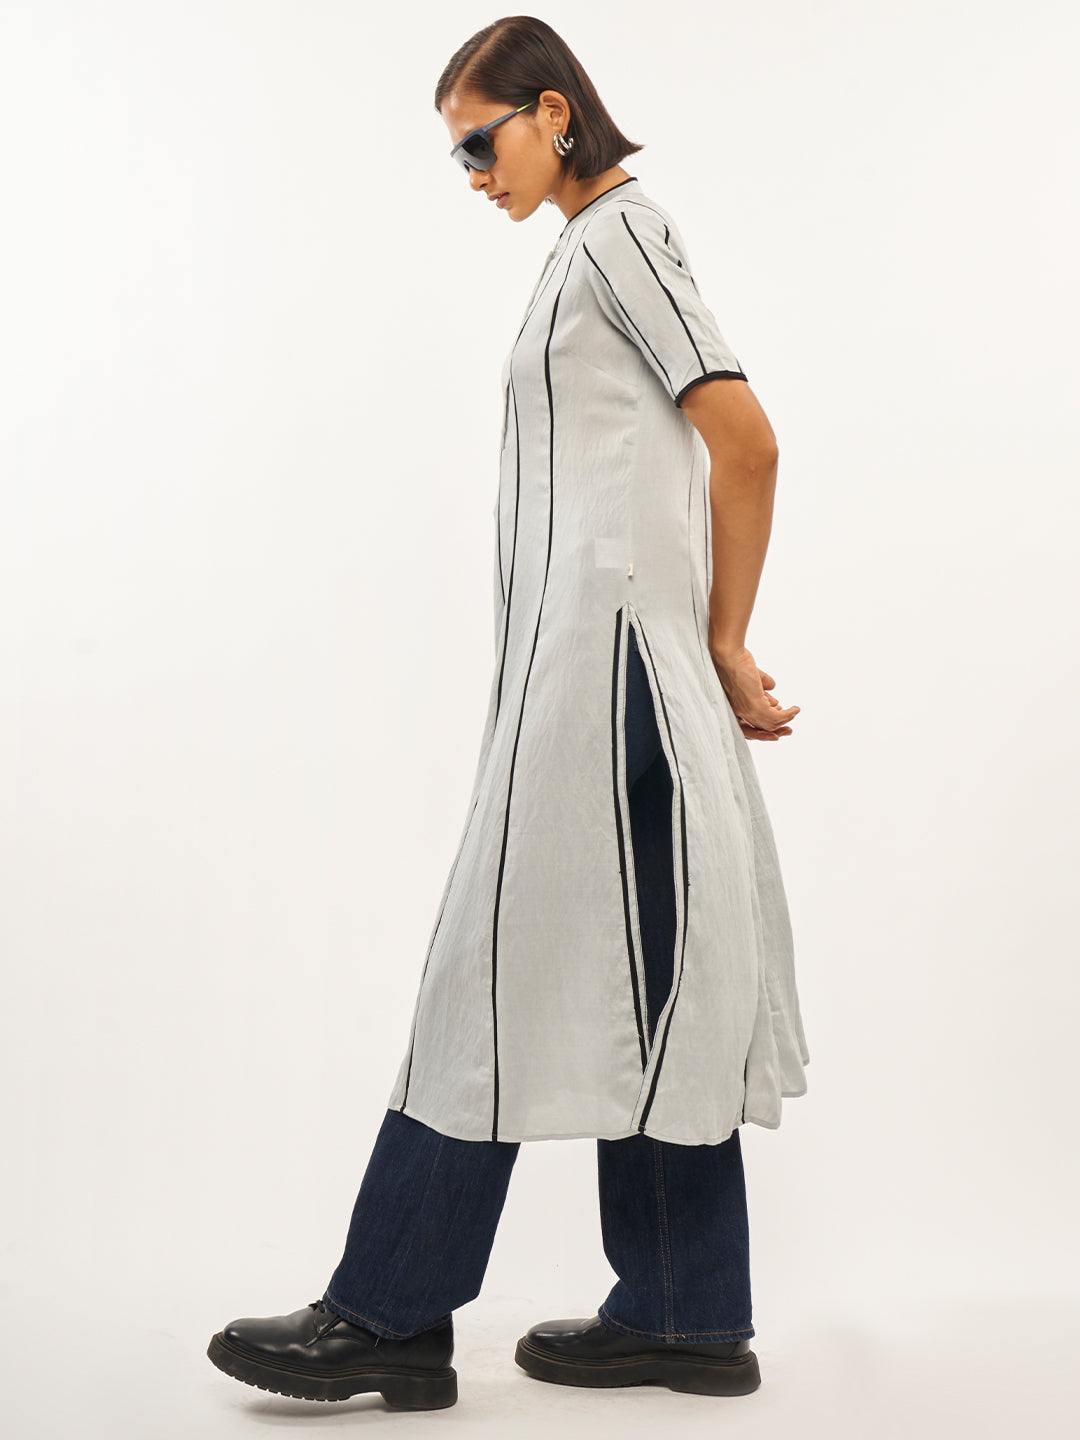 Striped Printed Kurta With Mock Buttons - ARH737